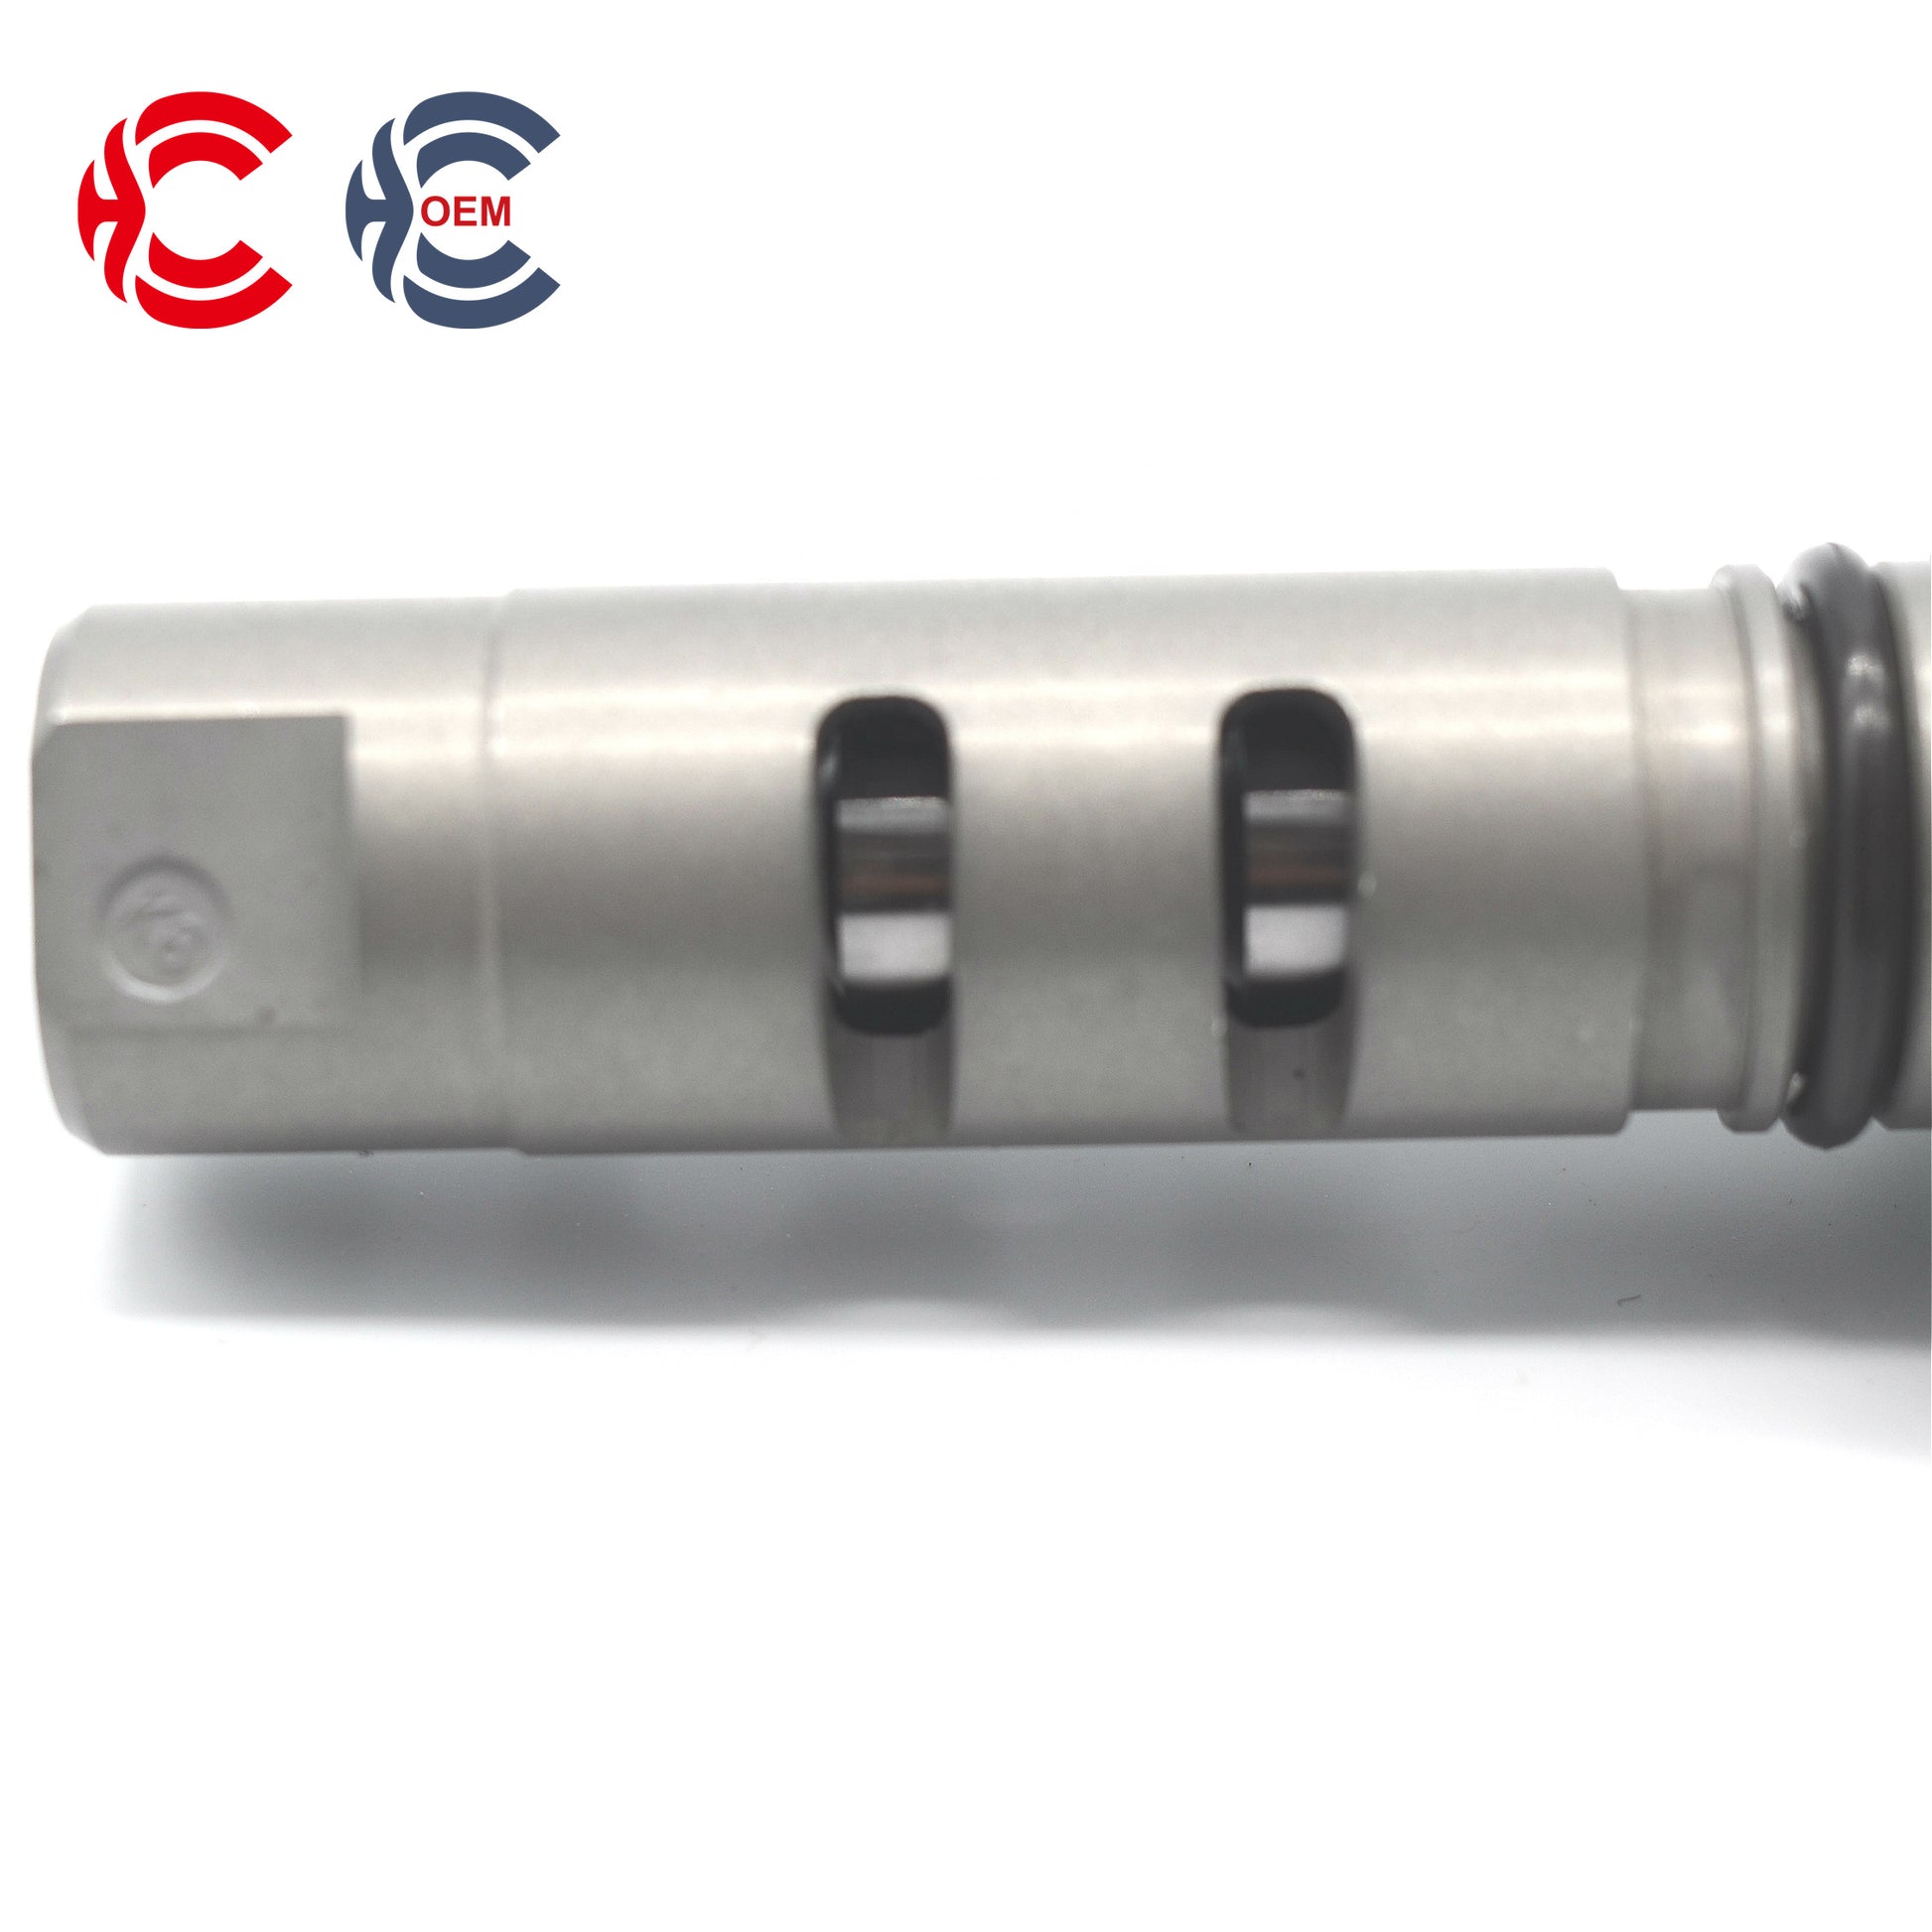 OEM: 10921-AA120Material: ABS metalColor: black silverOrigin: Made in ChinaWeight: 300gPacking List: 1* VVT Solenoid Valve More ServiceWe can provide OEM Manufacturing serviceWe can Be your one-step solution for Auto PartsWe can provide technical scheme for you Feel Free to Contact Us, We will get back to you as soon as possible.